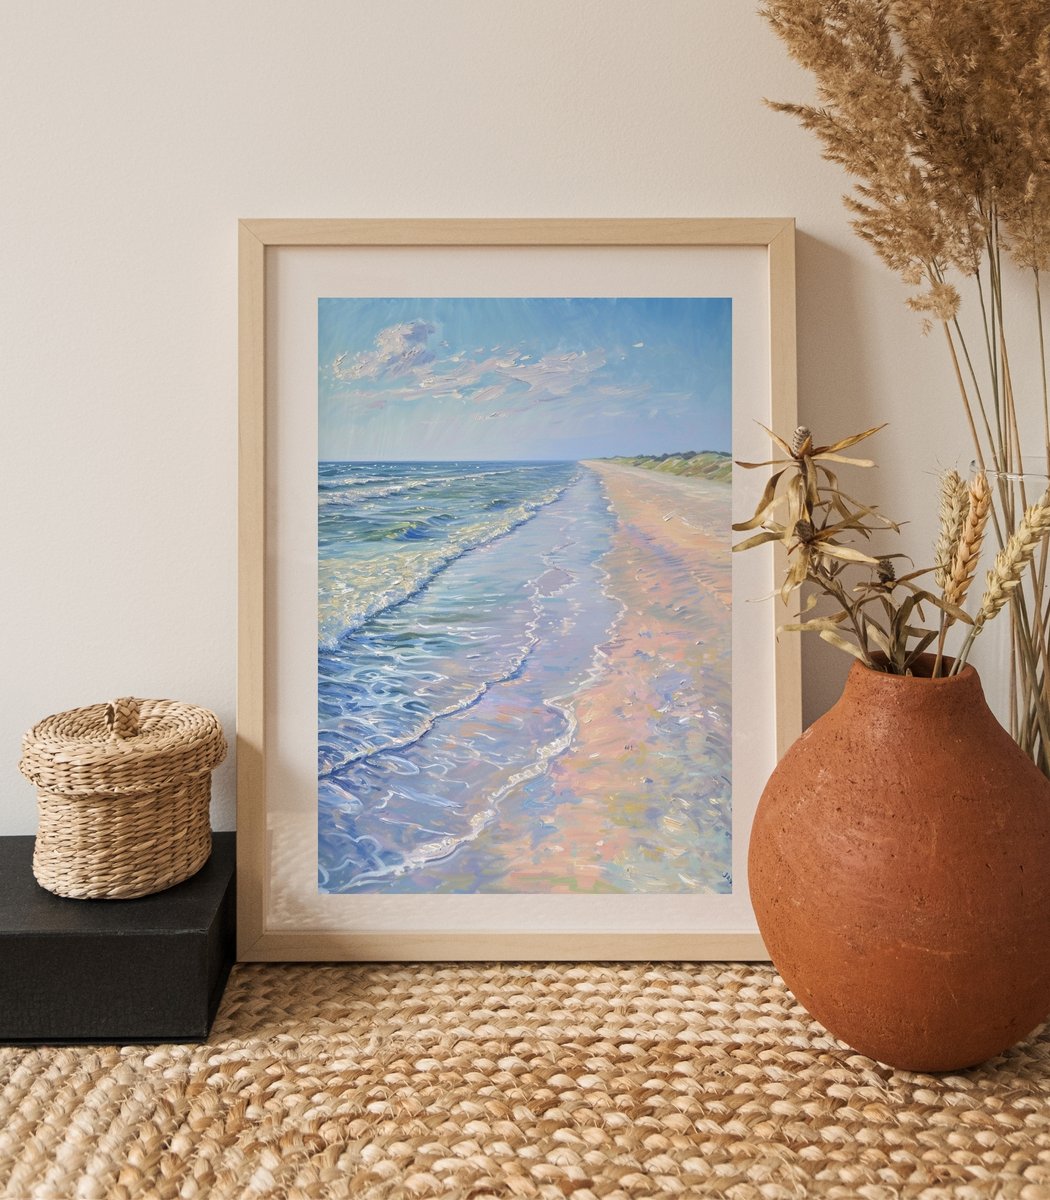 Walk along the shore with this soothing beach print from Lena Art Design, where the sea whispers tales of the deep. 🌊🏖️ #BeachWalk #SeasideArt #LenaArtDesign